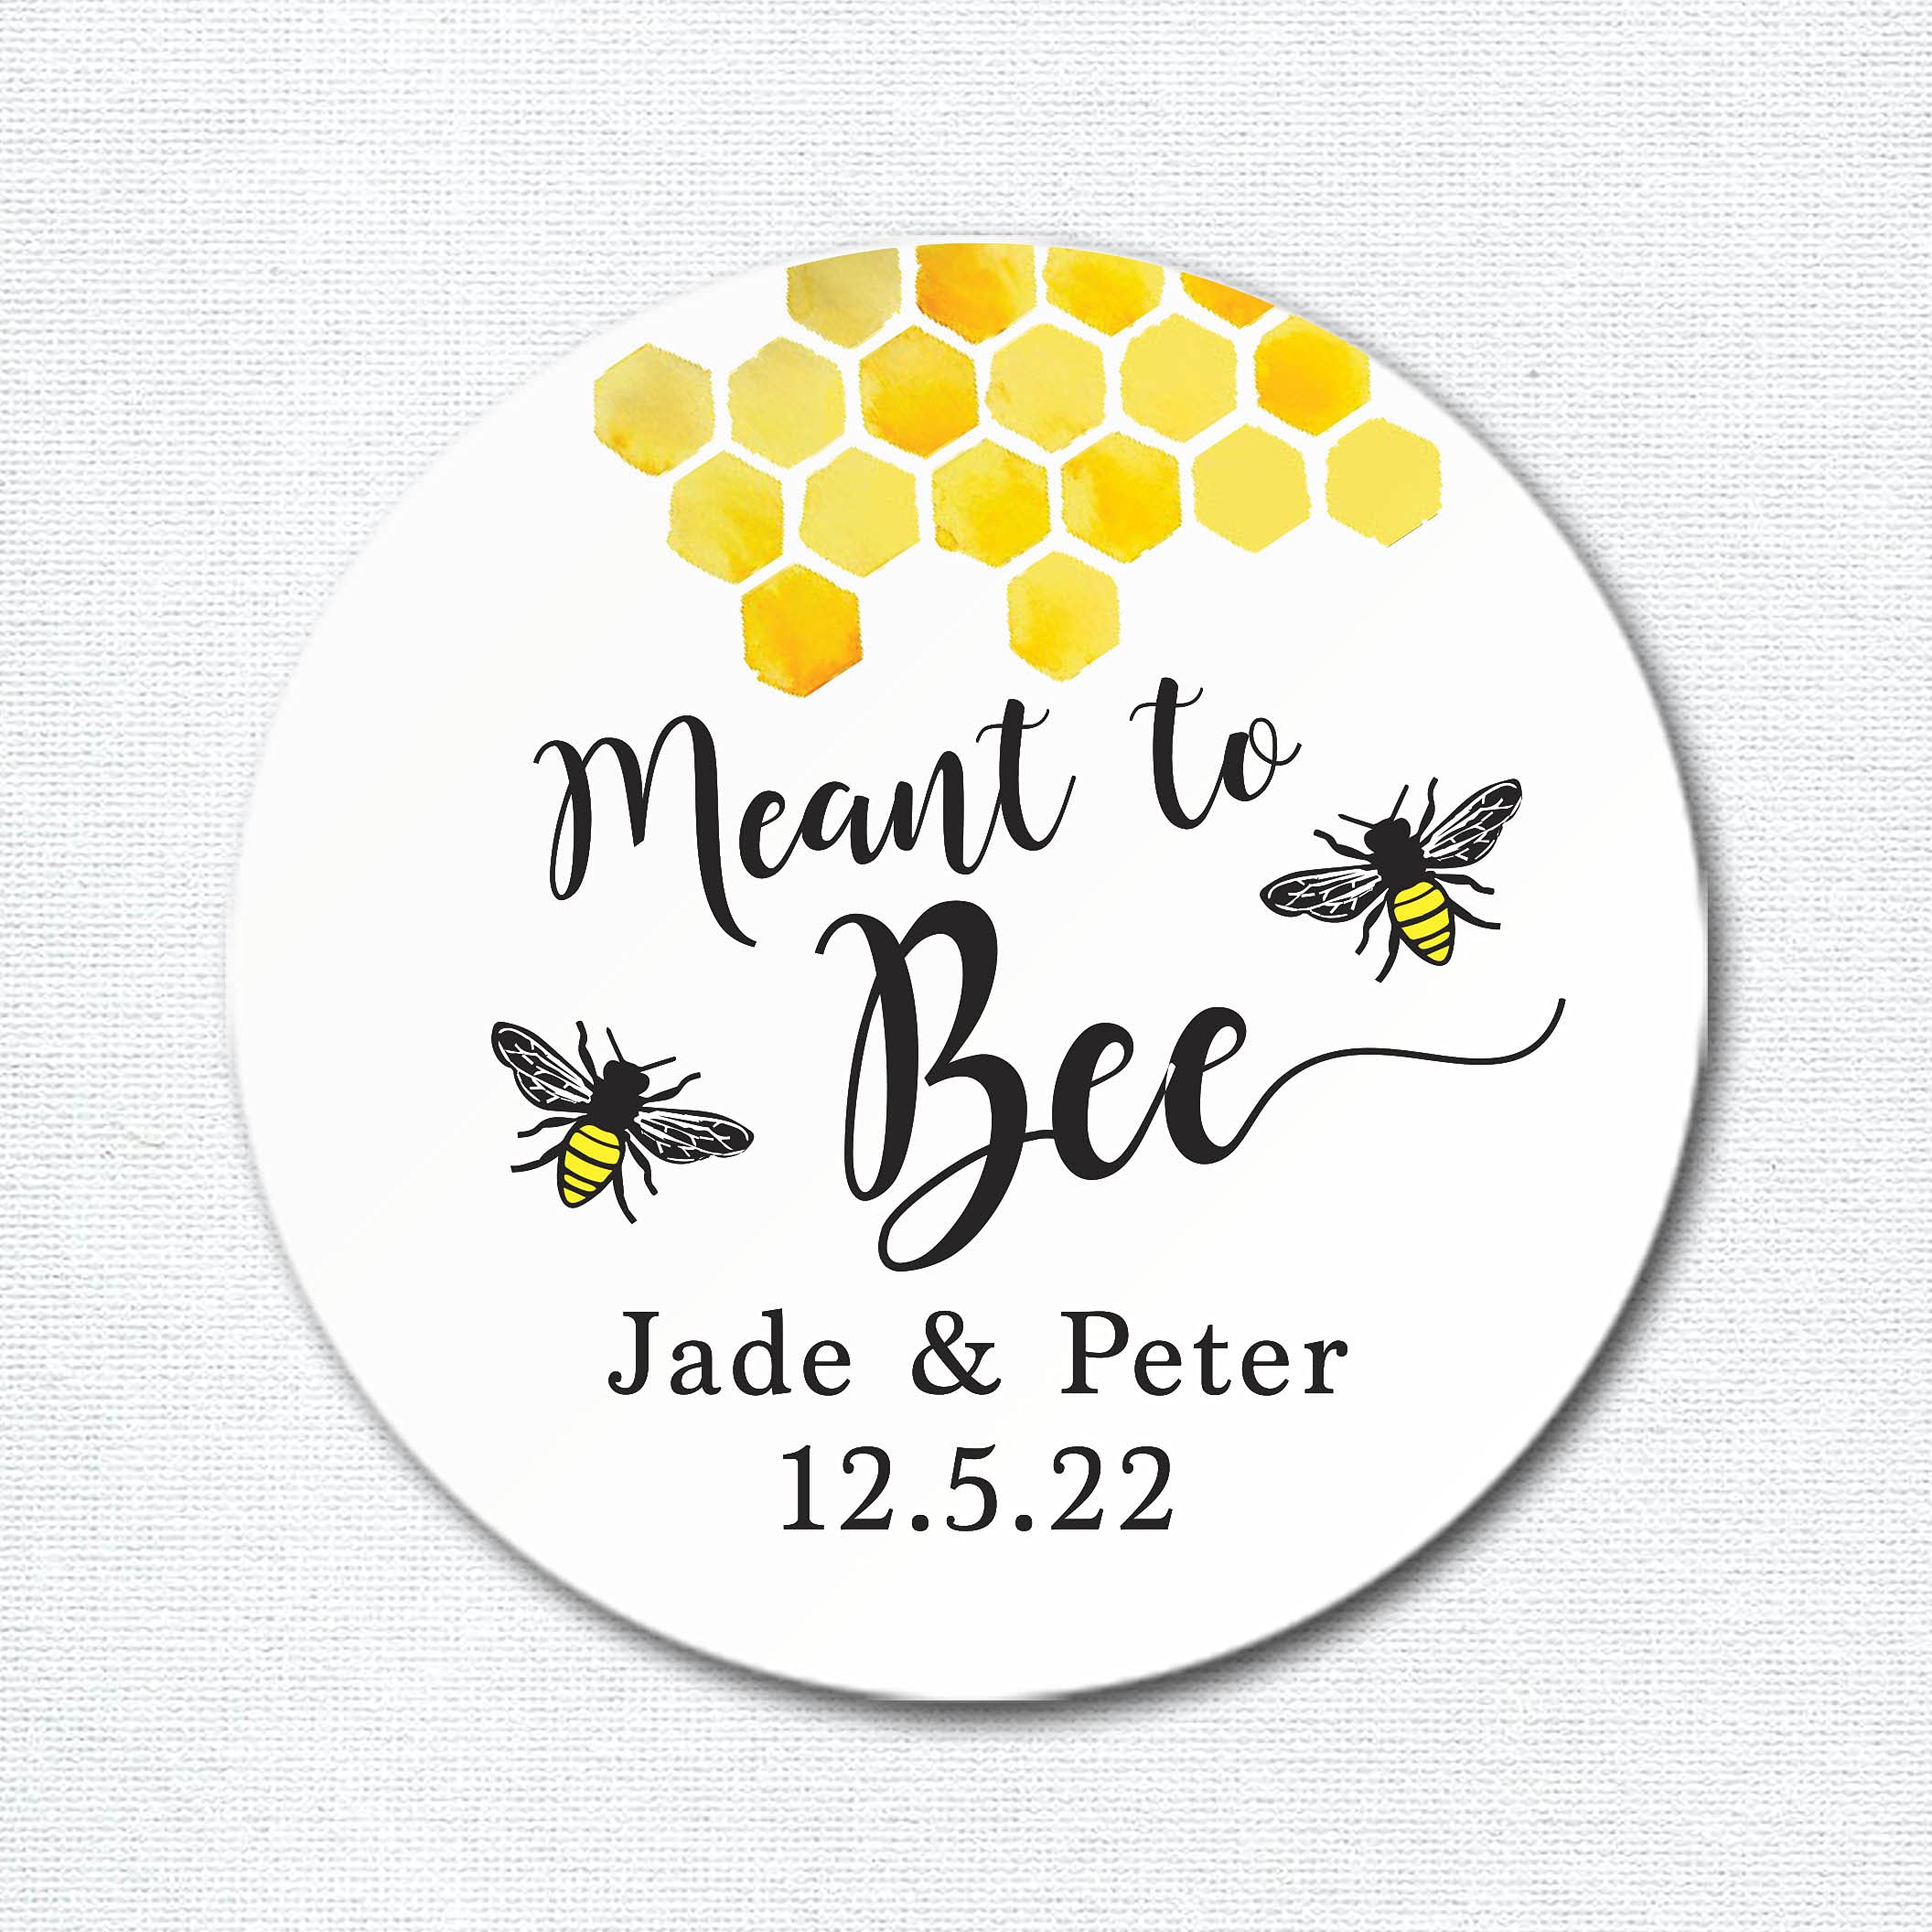 Meant to bee sticker, Honey favor stickers, Meant to bee labels, Custom wedding stickers, Honey bee party